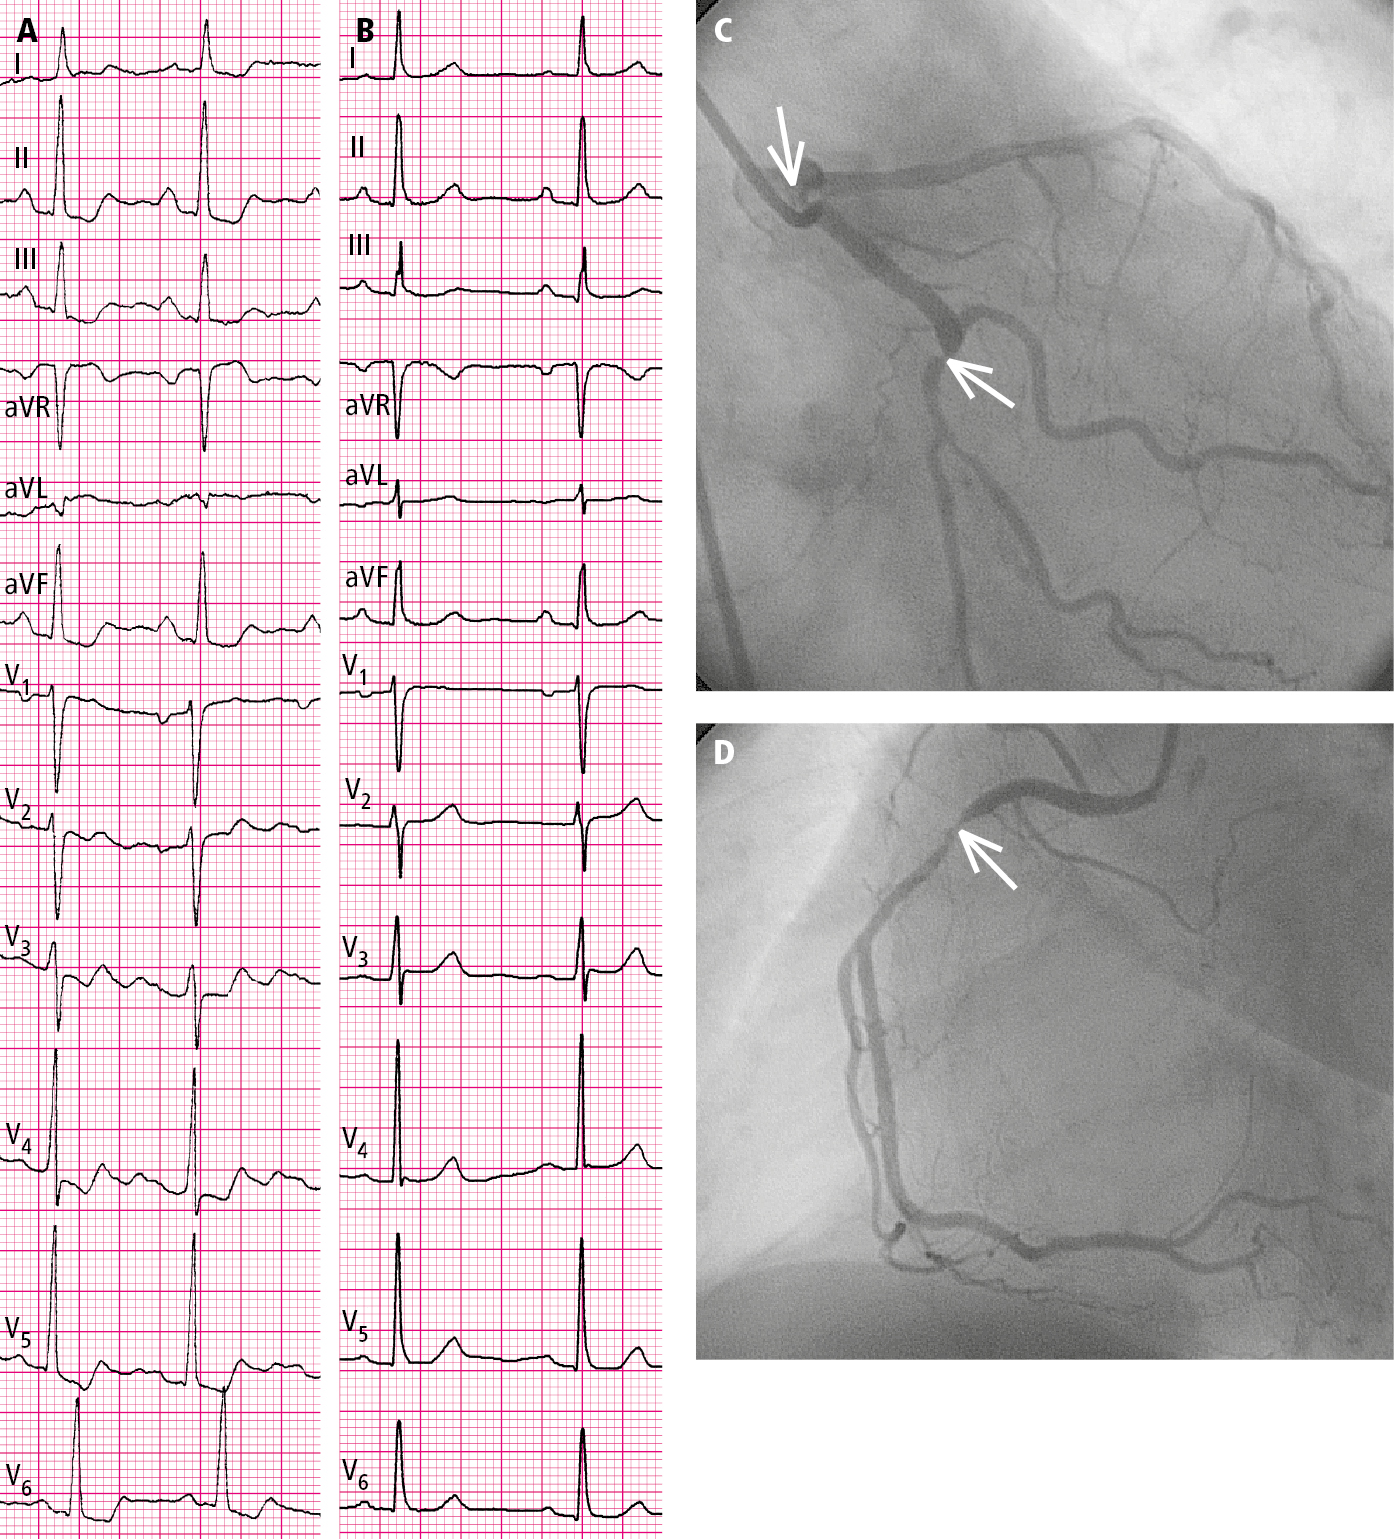 Figure 031_8182.  Resting electrocardiography (ECG) of a 67-year-old woman during a chest pain episode (  A  ; ST-segment depression in leads II, III, aVF, and V 4  through V 6 ) and after pain resolution (  B  ). Coronary angiography showed stenoses (arrows) at the origin of the left anterior descending artery (80%), in the left circumflex artery (90%;  C ), and in the right coronary artery (90%;  D ). 